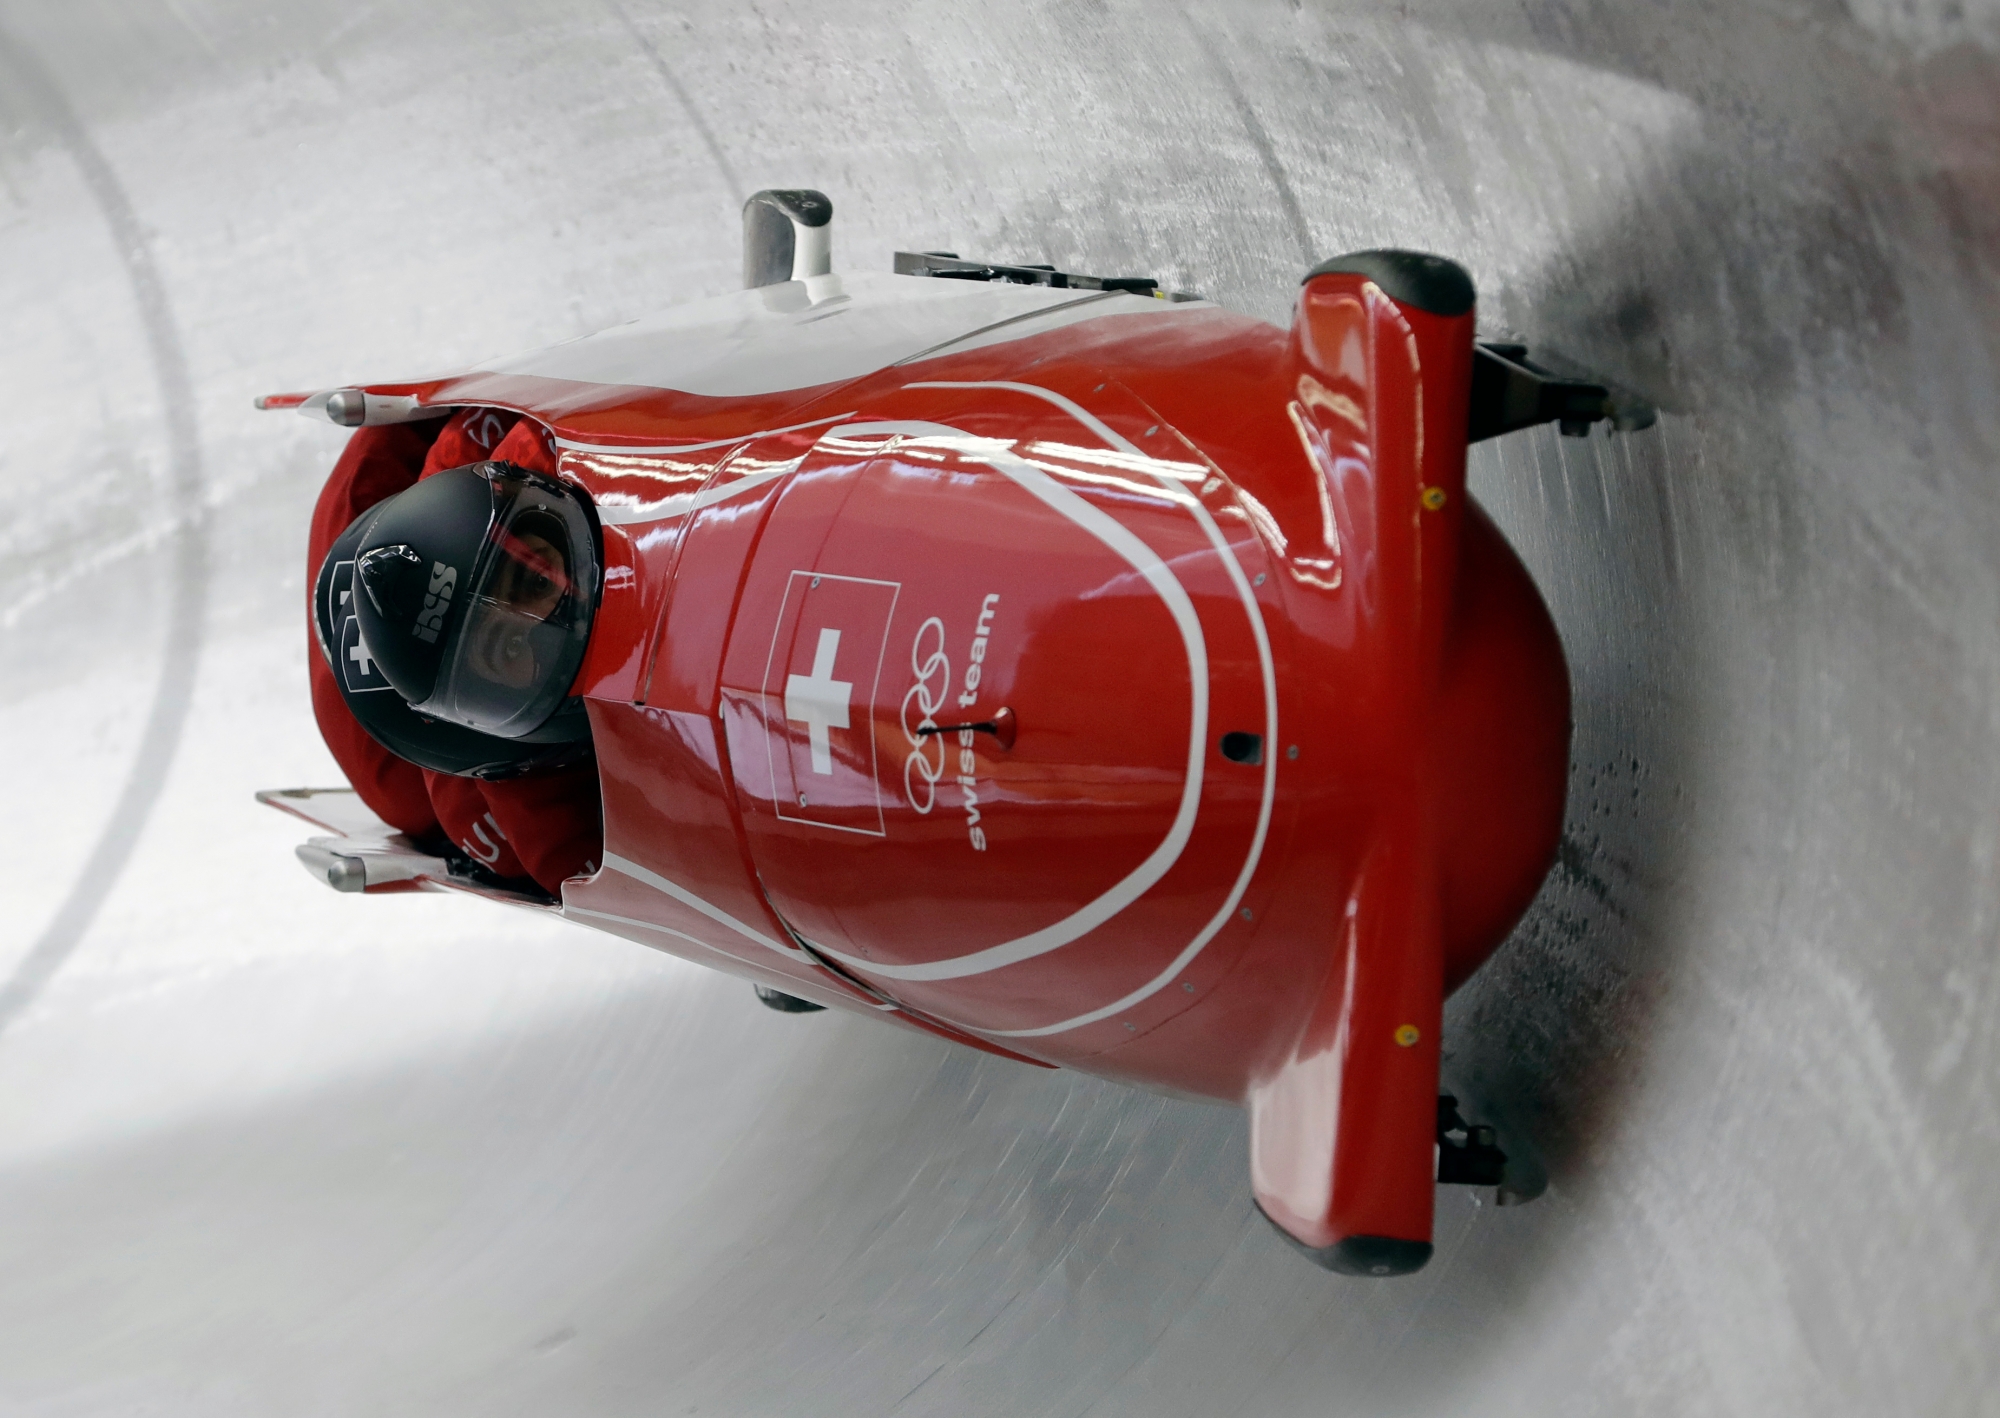 Driver Clemens Bracher, Fabio Badraun, Sandro Ferrari and Martin Meier of Switzerland take a practice run during training for the four-man bobsled competition at the 2018 Winter Olympics in Pyeongchang, South Korea, Thursday, Feb. 22, 2018. (AP Photo/Michael Sohn) Pyeongchang Olympics Bobsled